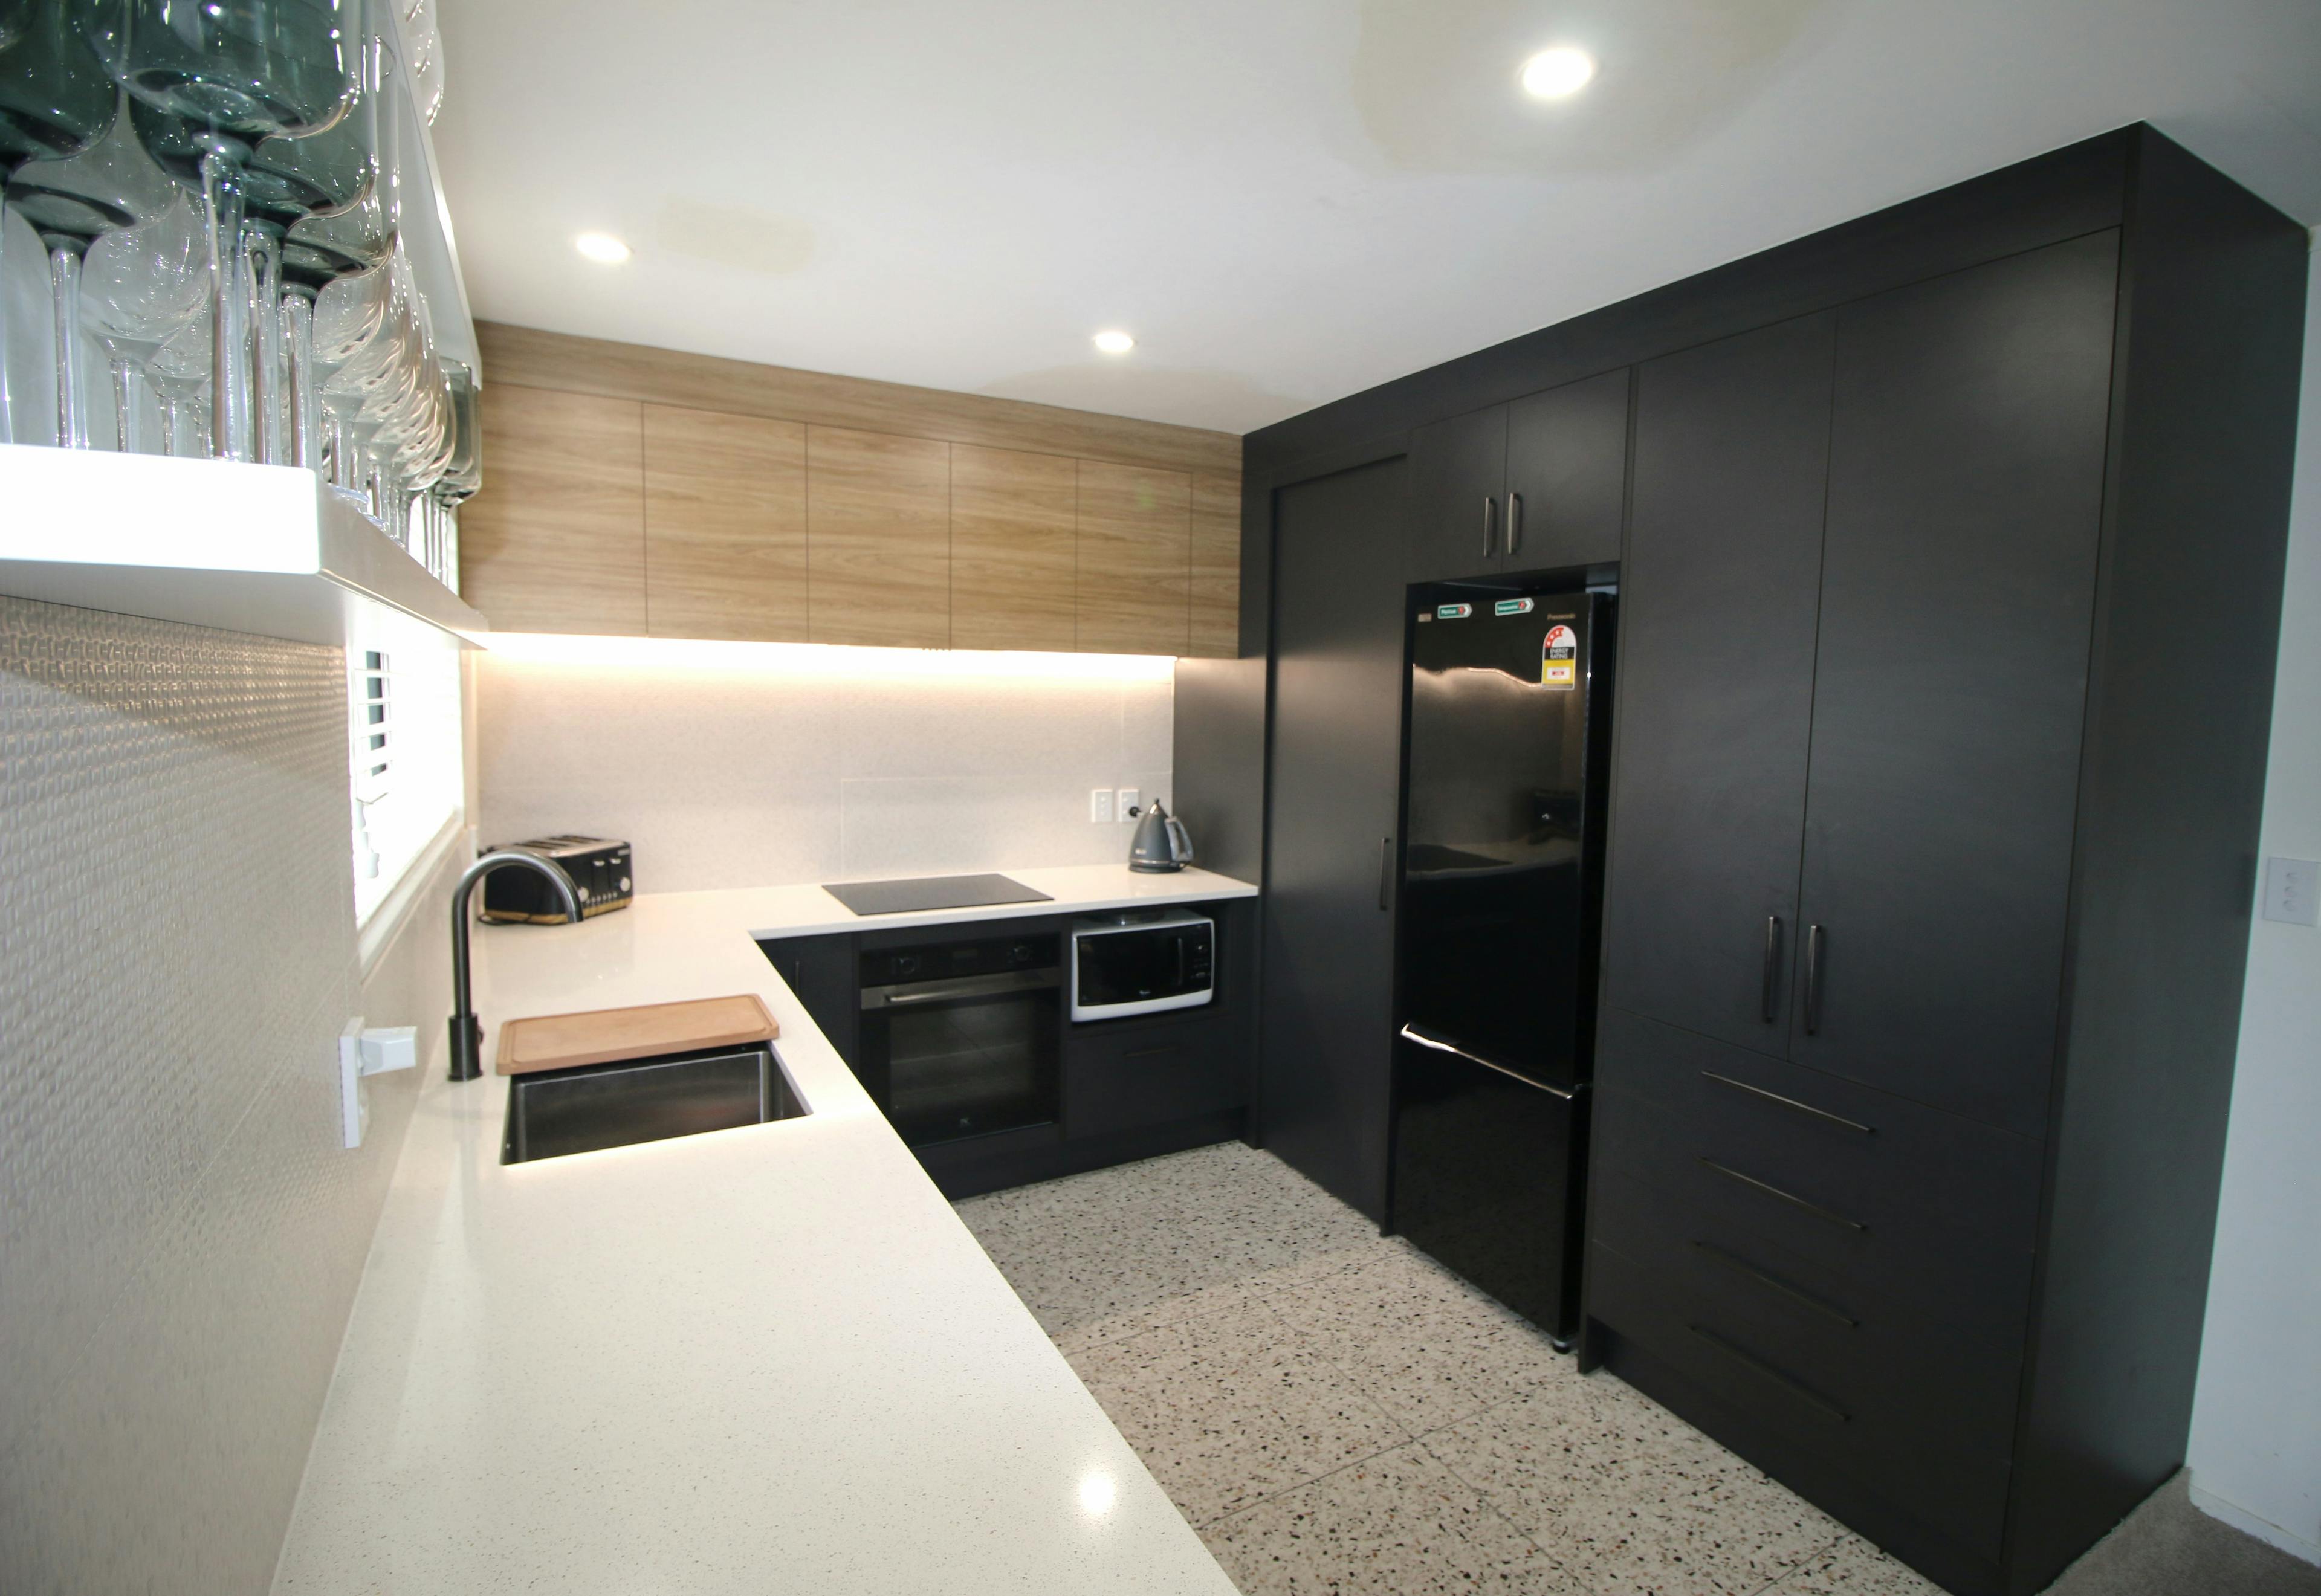 A background picture a kitchen designed and installed by The Kitchen Zone